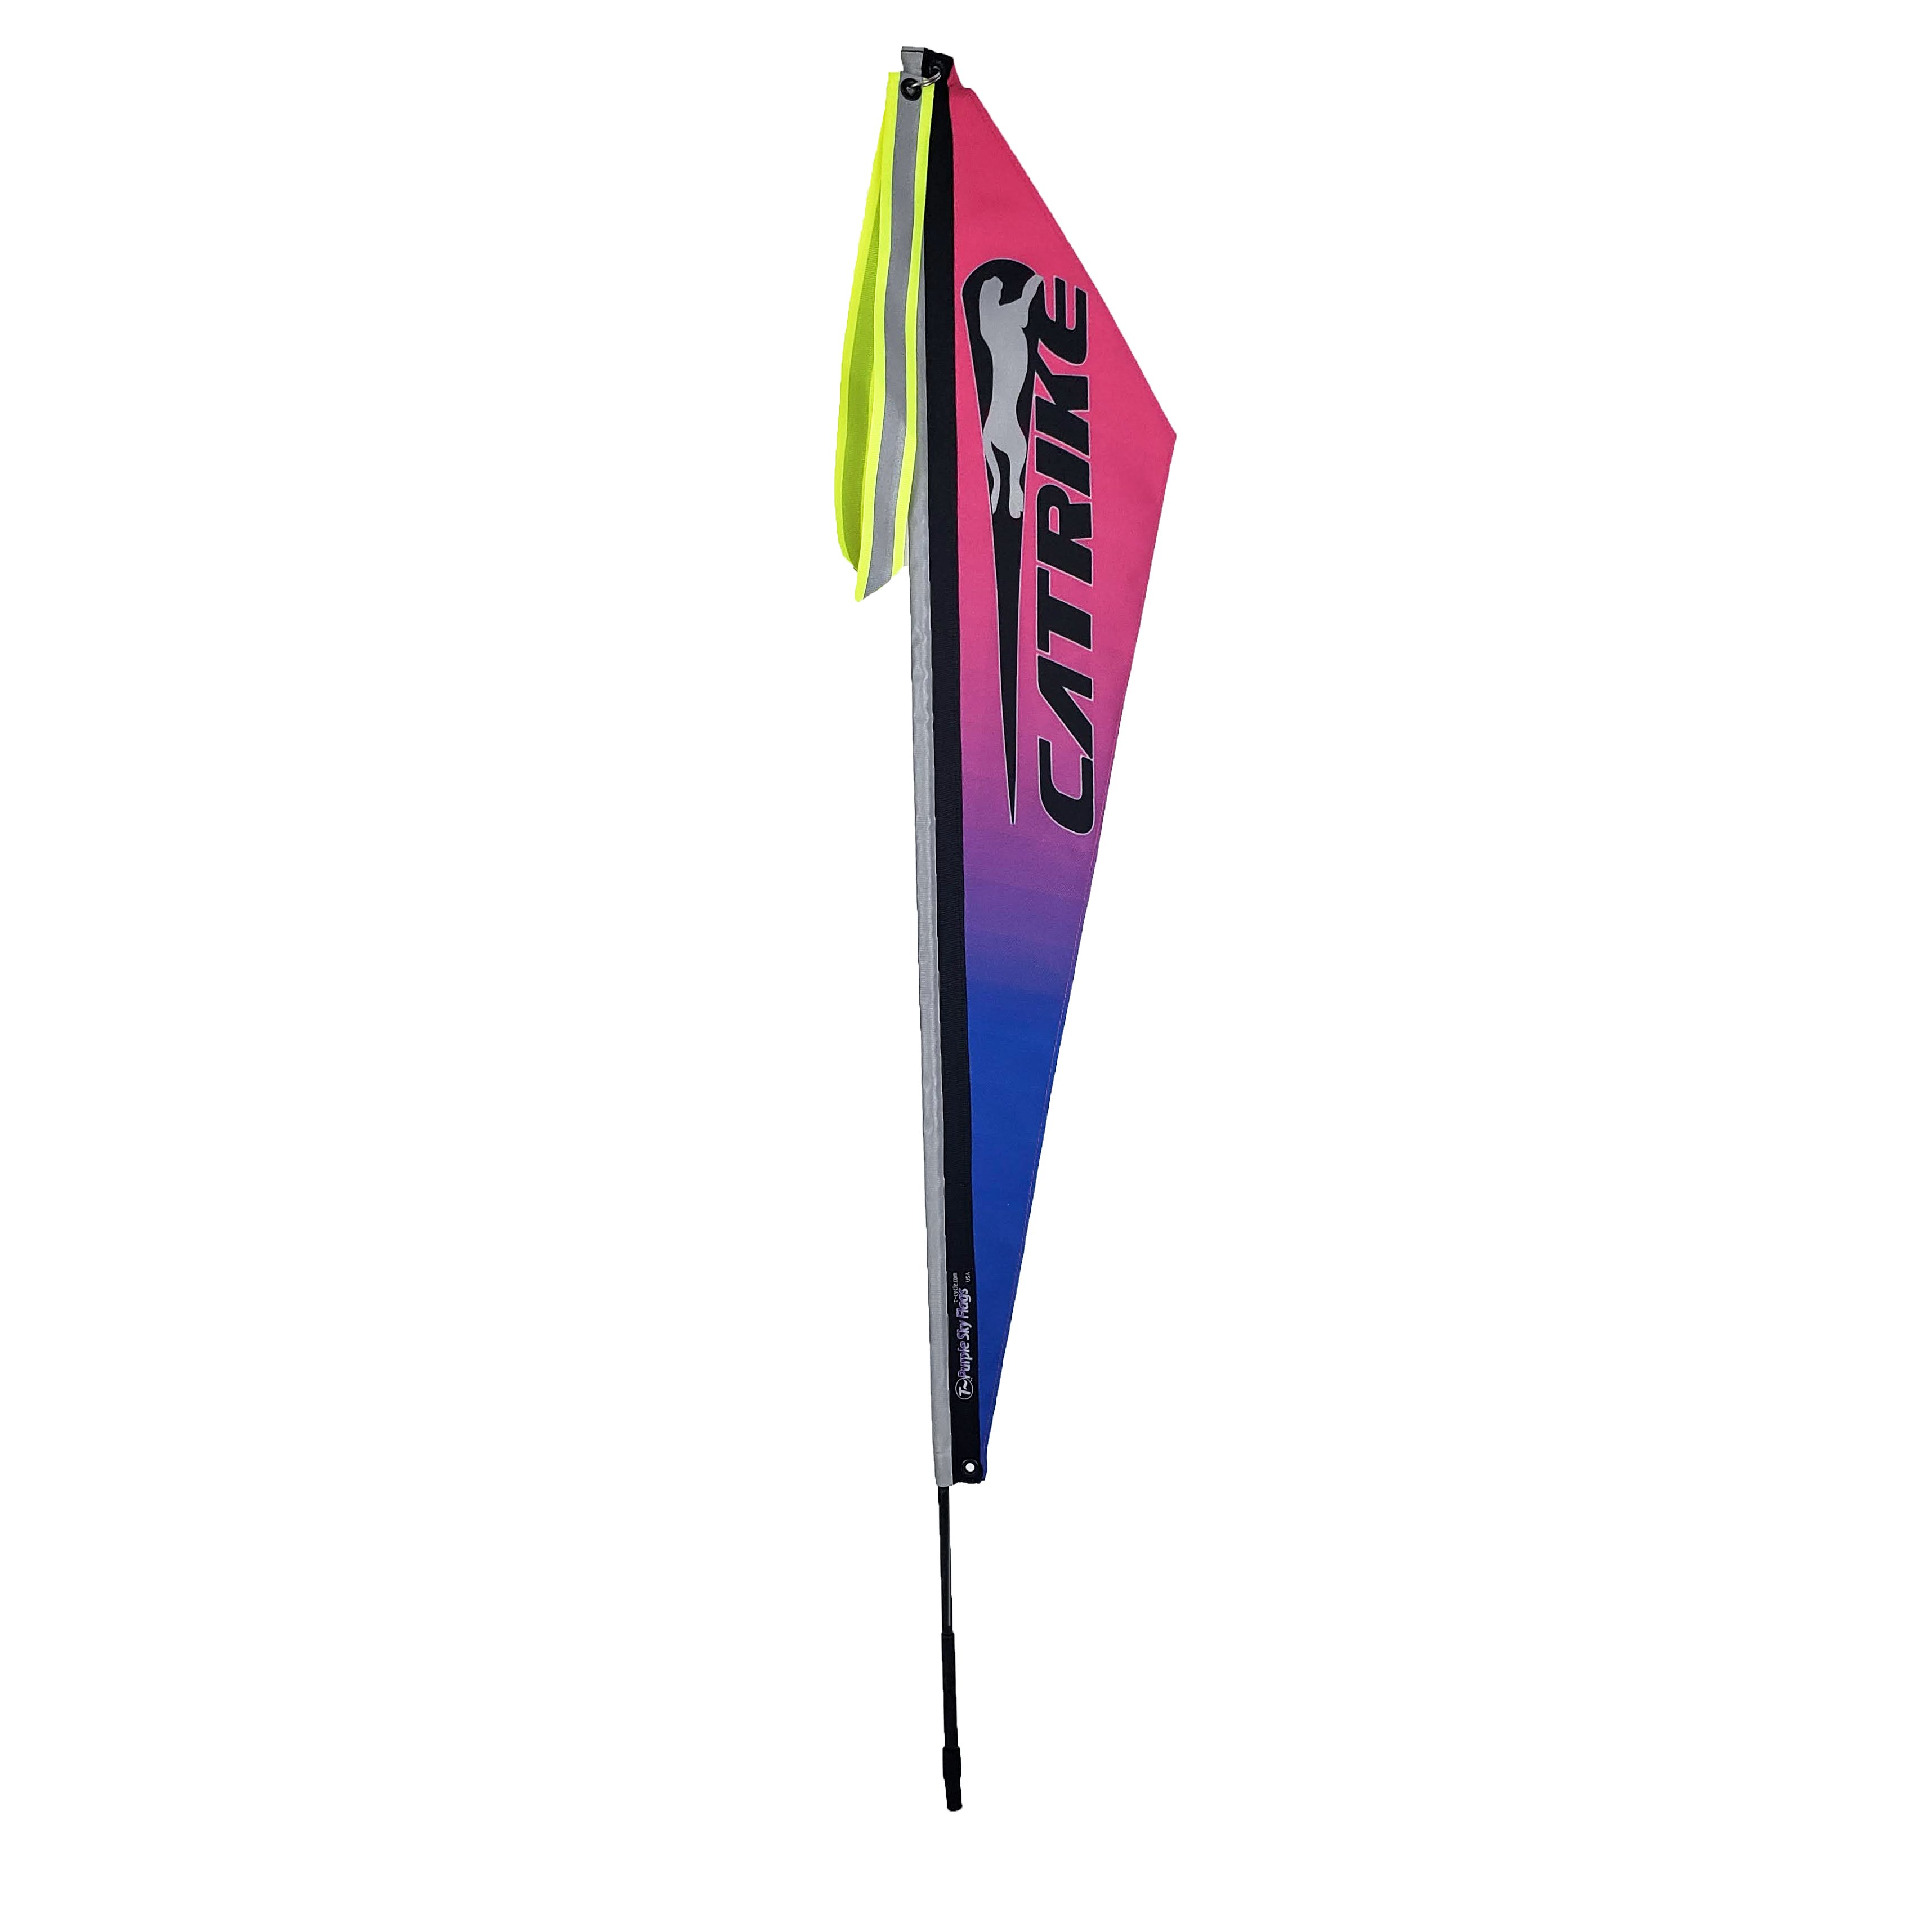 Foldable flag pole with a safety height of 5.2 feet SET of 2 Premium CYCLEY premium bike safety flags 